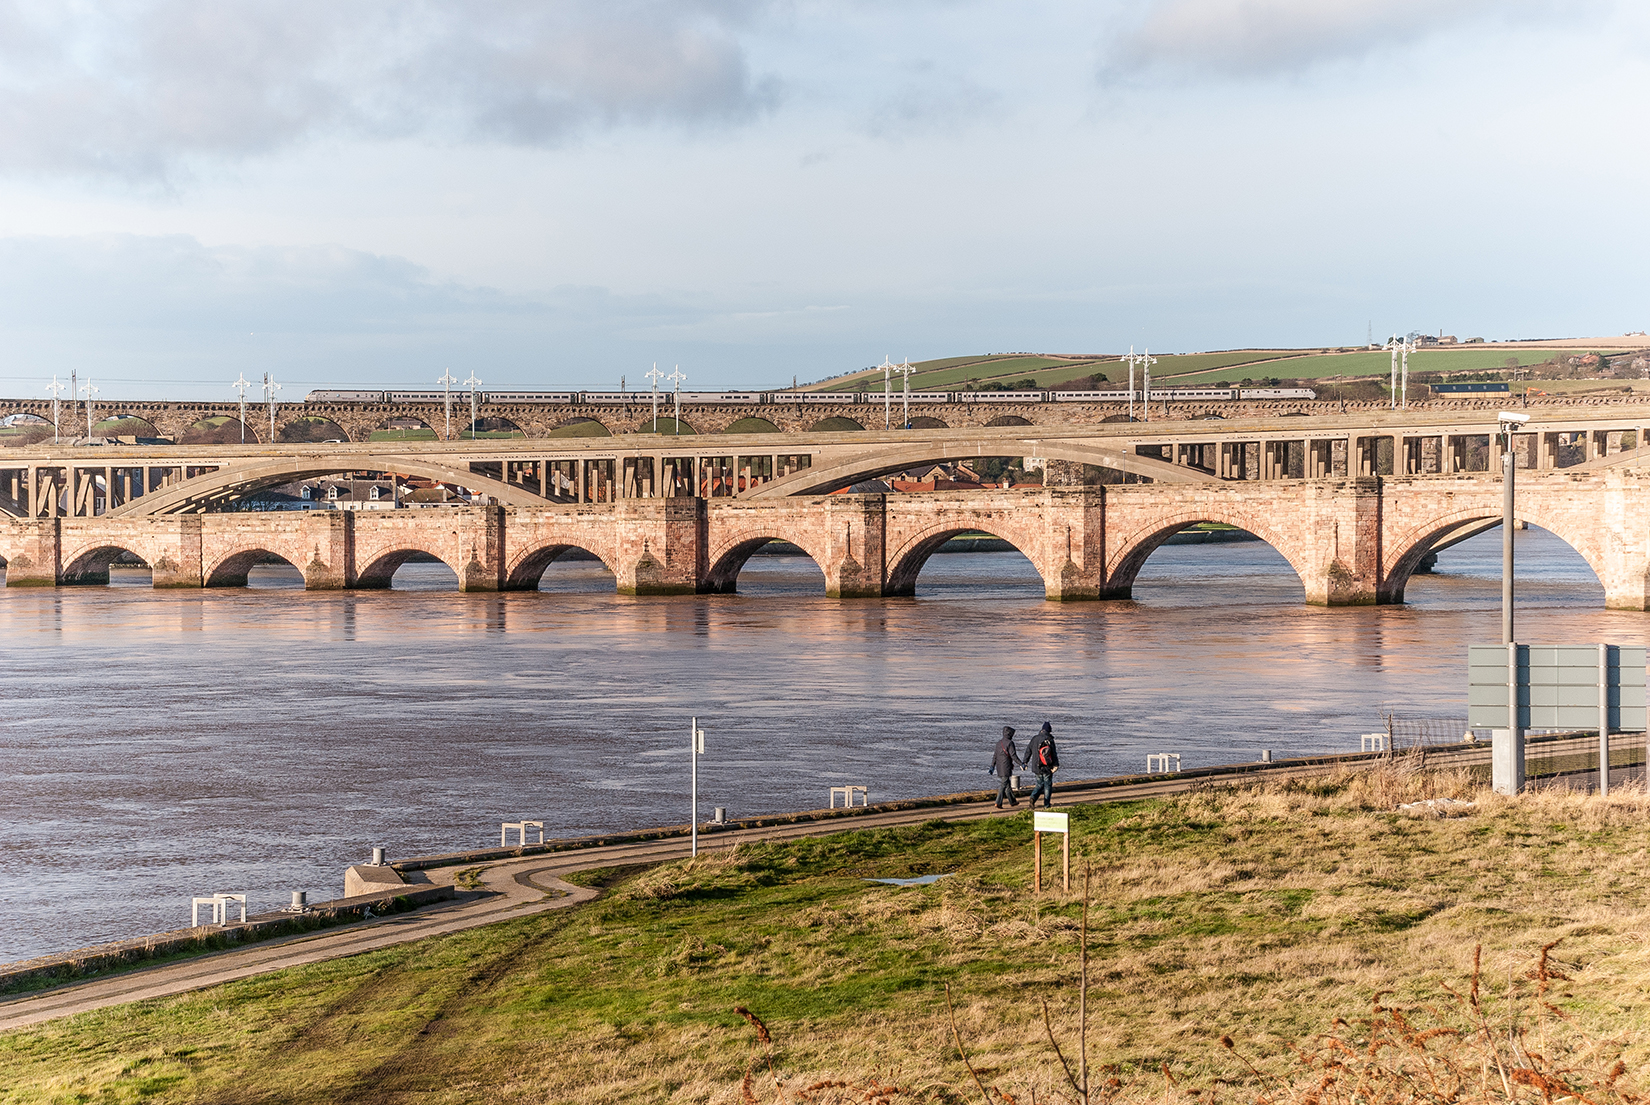 Rail and road bridges spanning the River Tweed